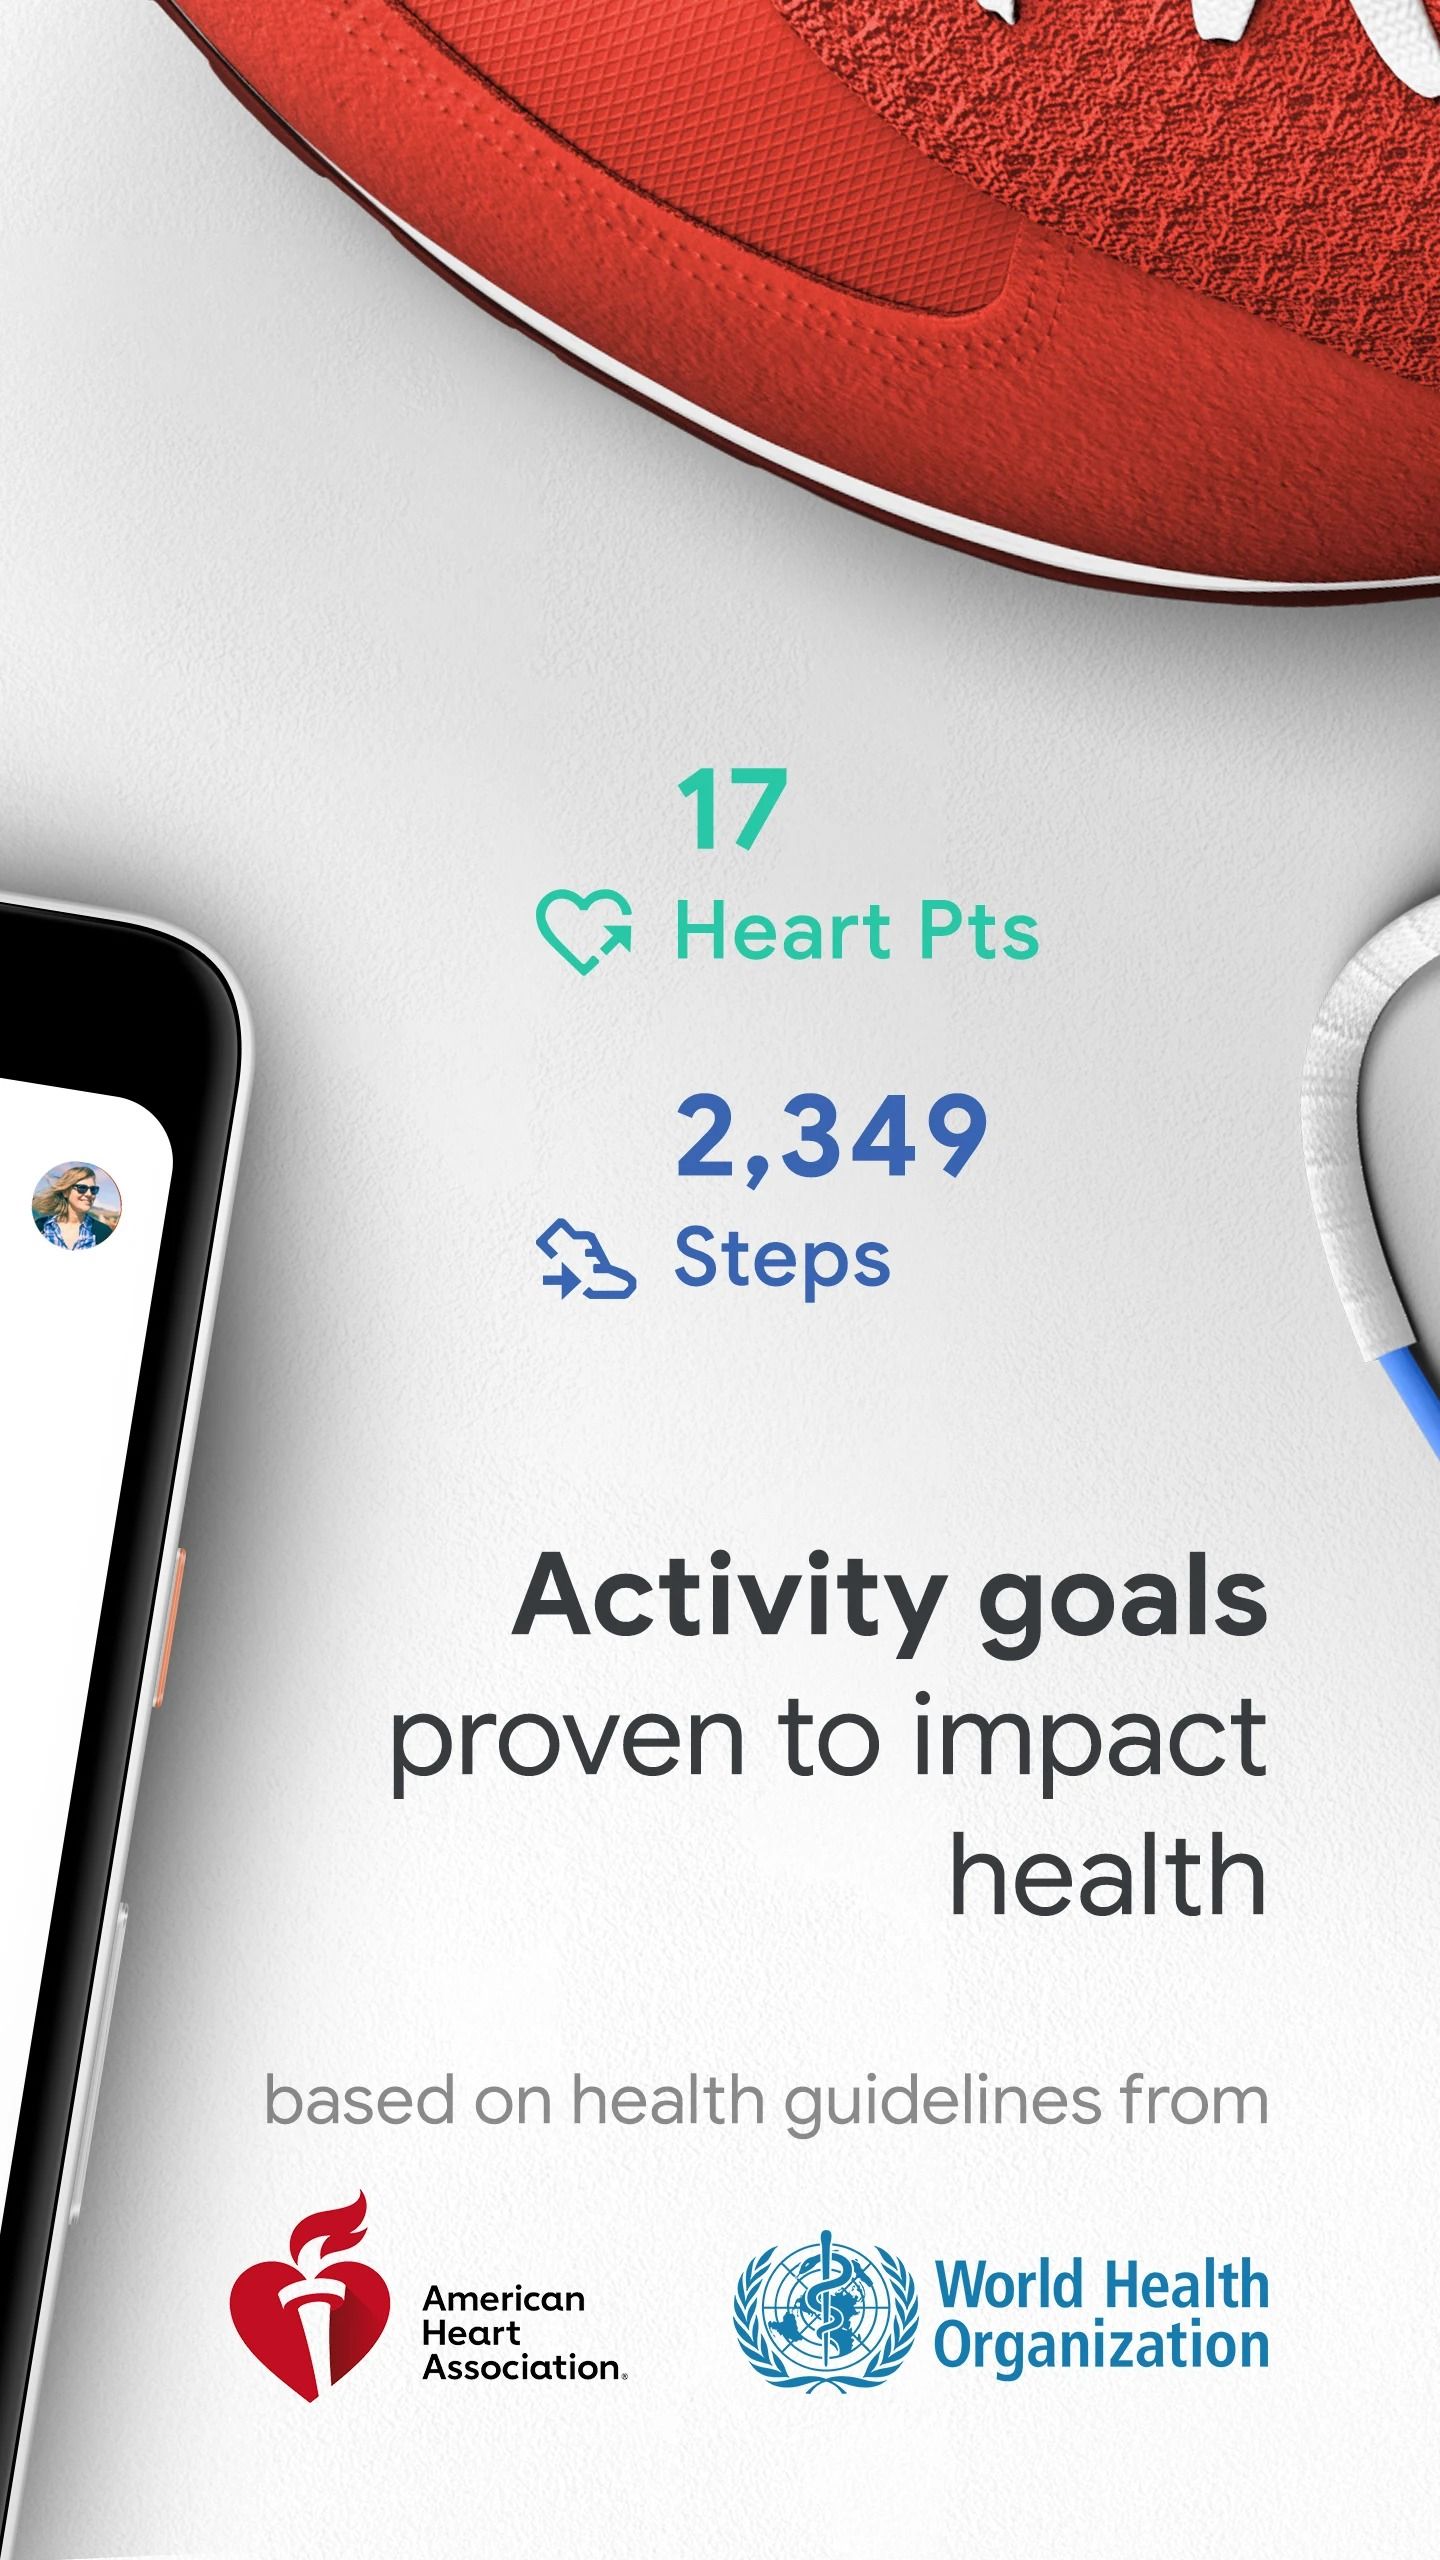 google fit steps and heart points with american heart association and world health organization logos